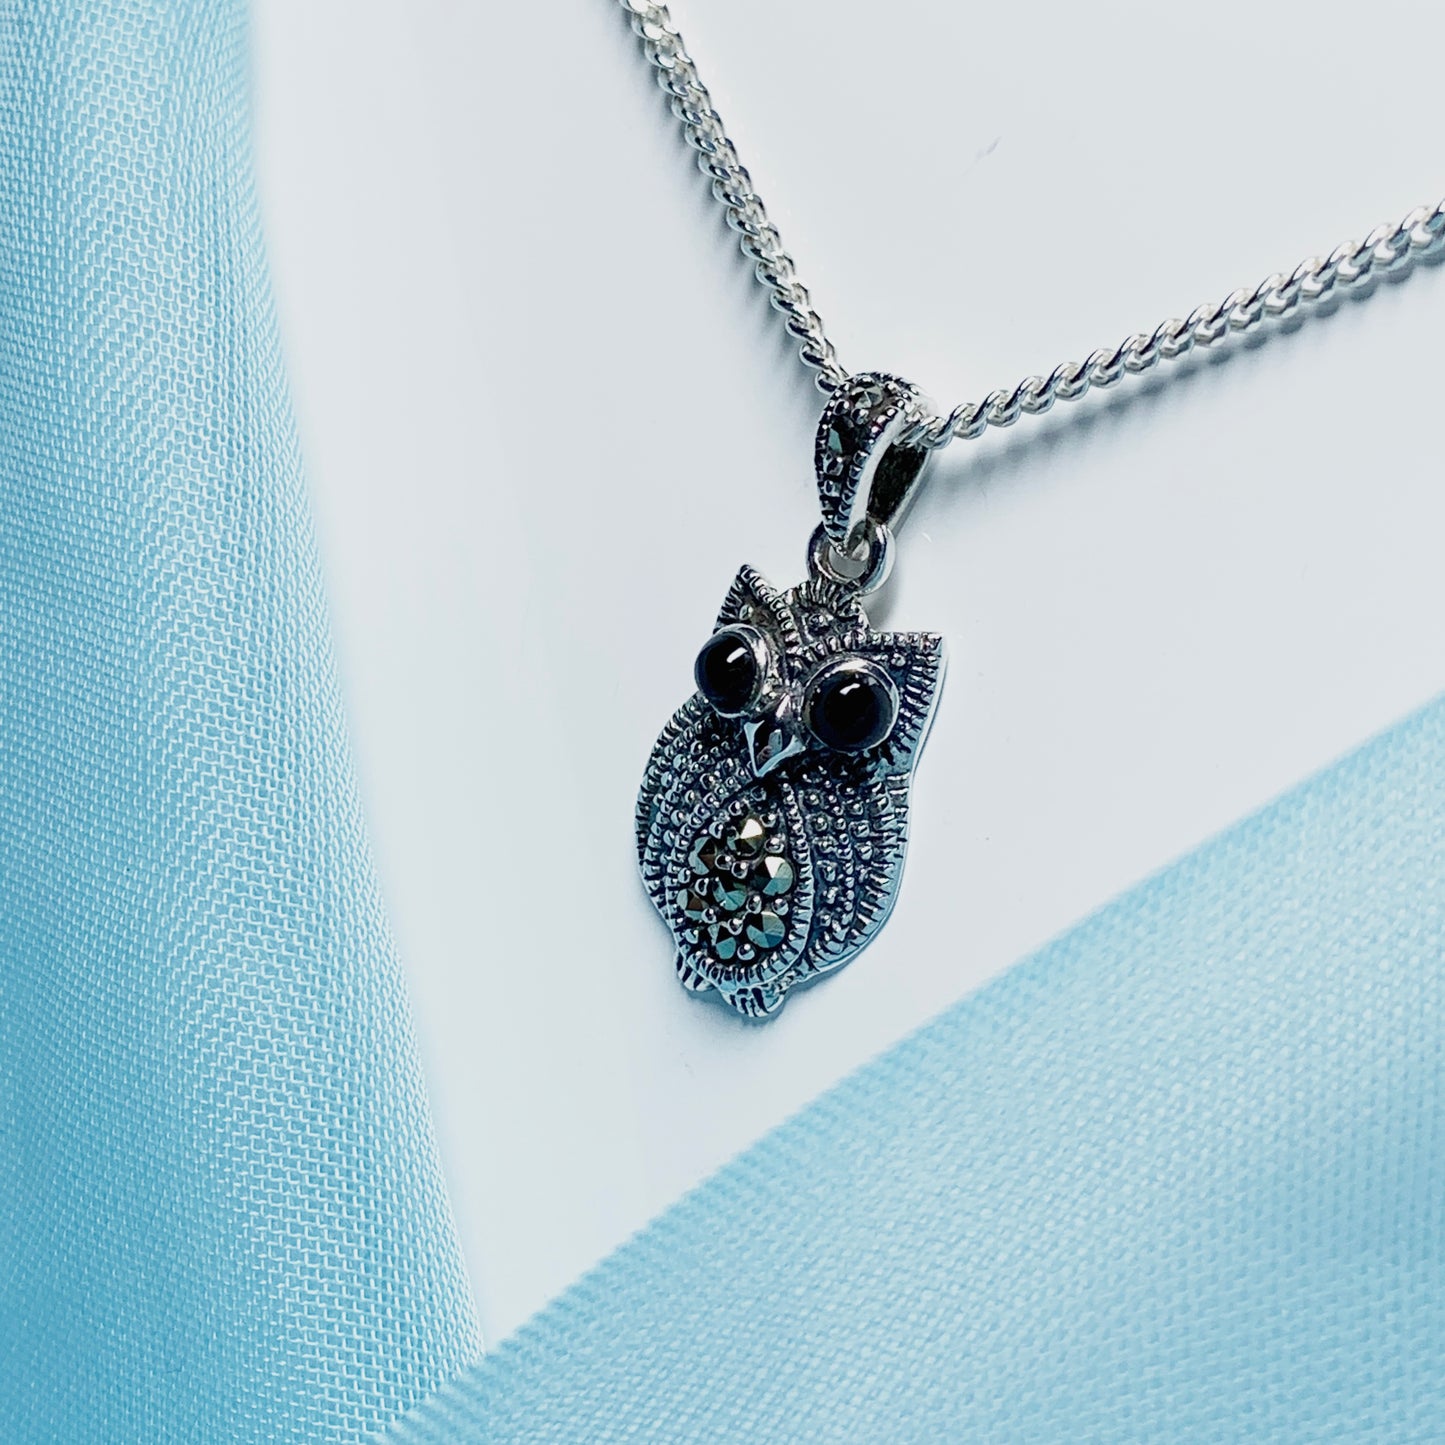 Owl Necklace Pendant Necklace Black Agate and Marcasite Sterling Silver